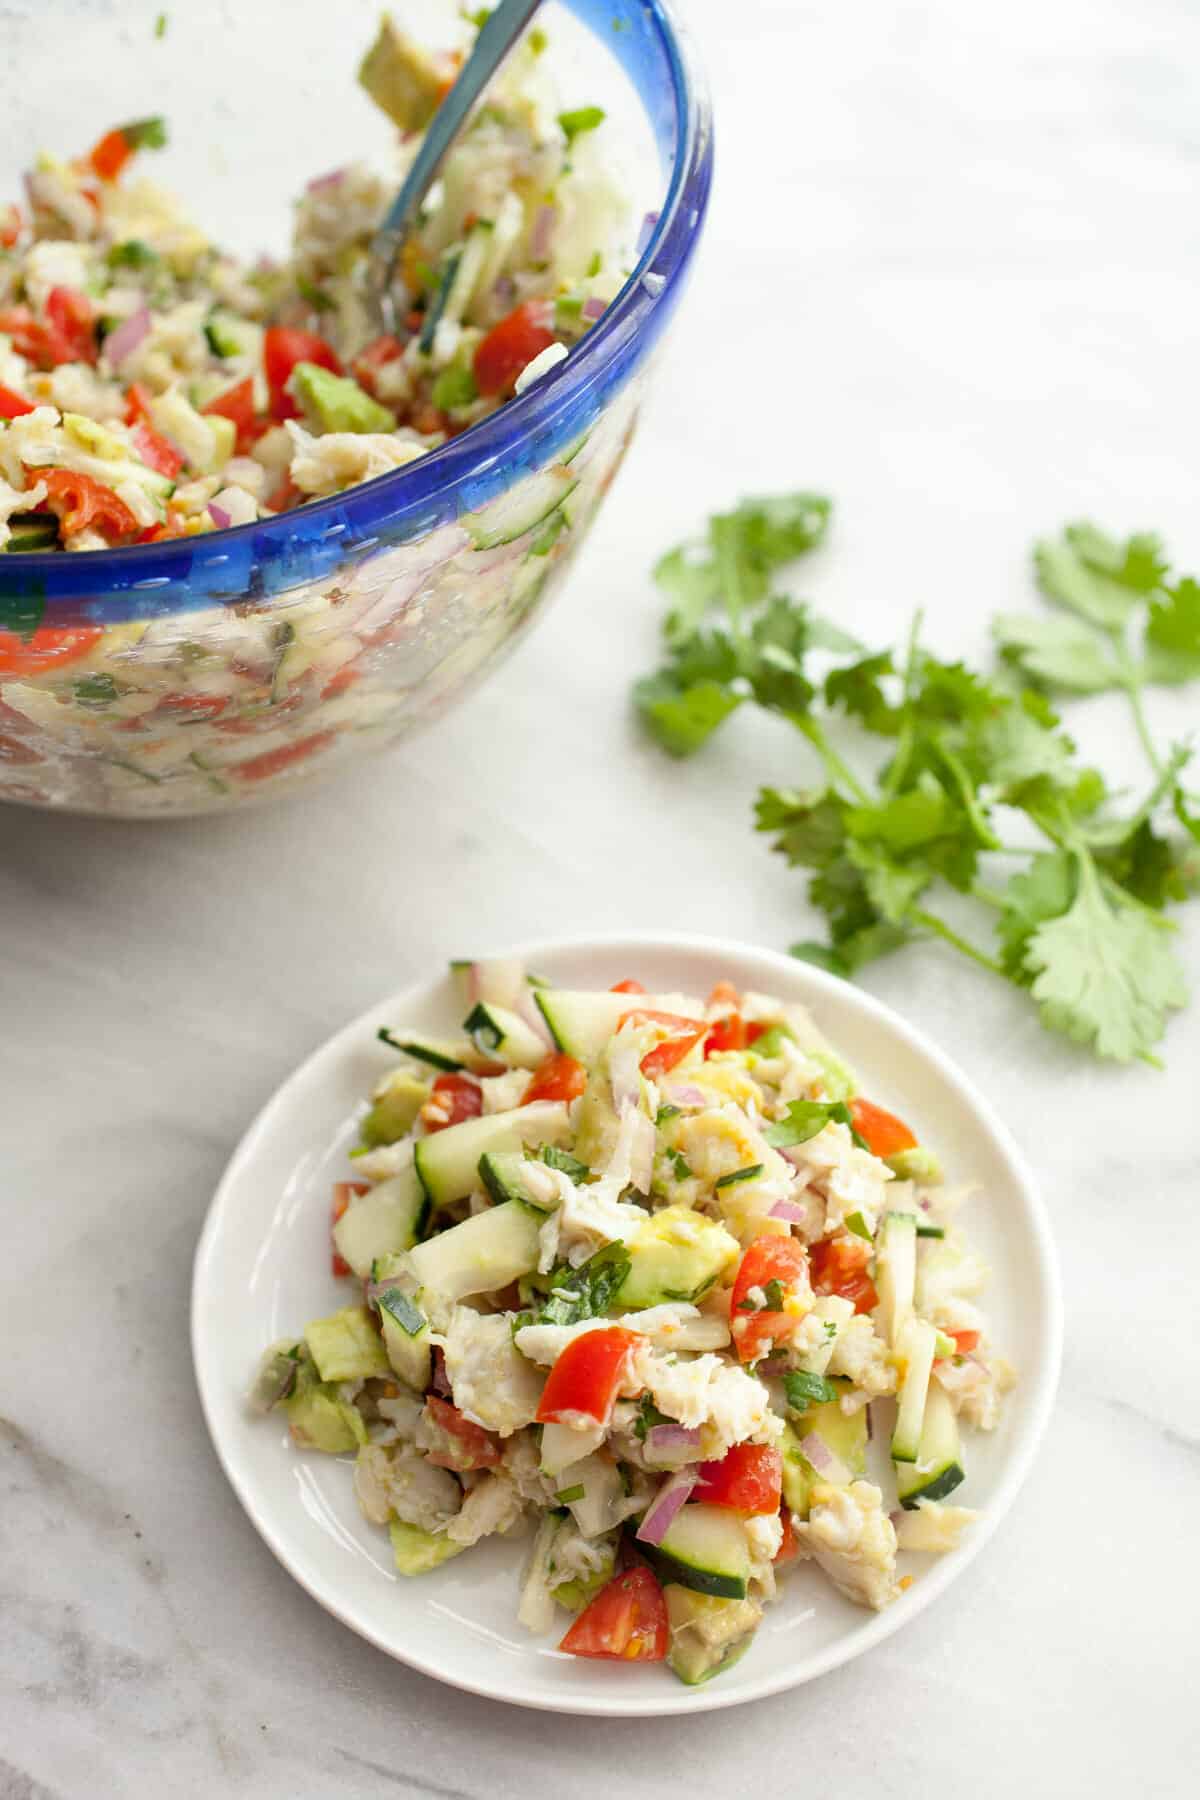 Easy Crab and Avocado Salad: This salad is so light and delicious. It's a perfect appetizer for summer and super easy to toss together. Enjoy! | macheesmo.com